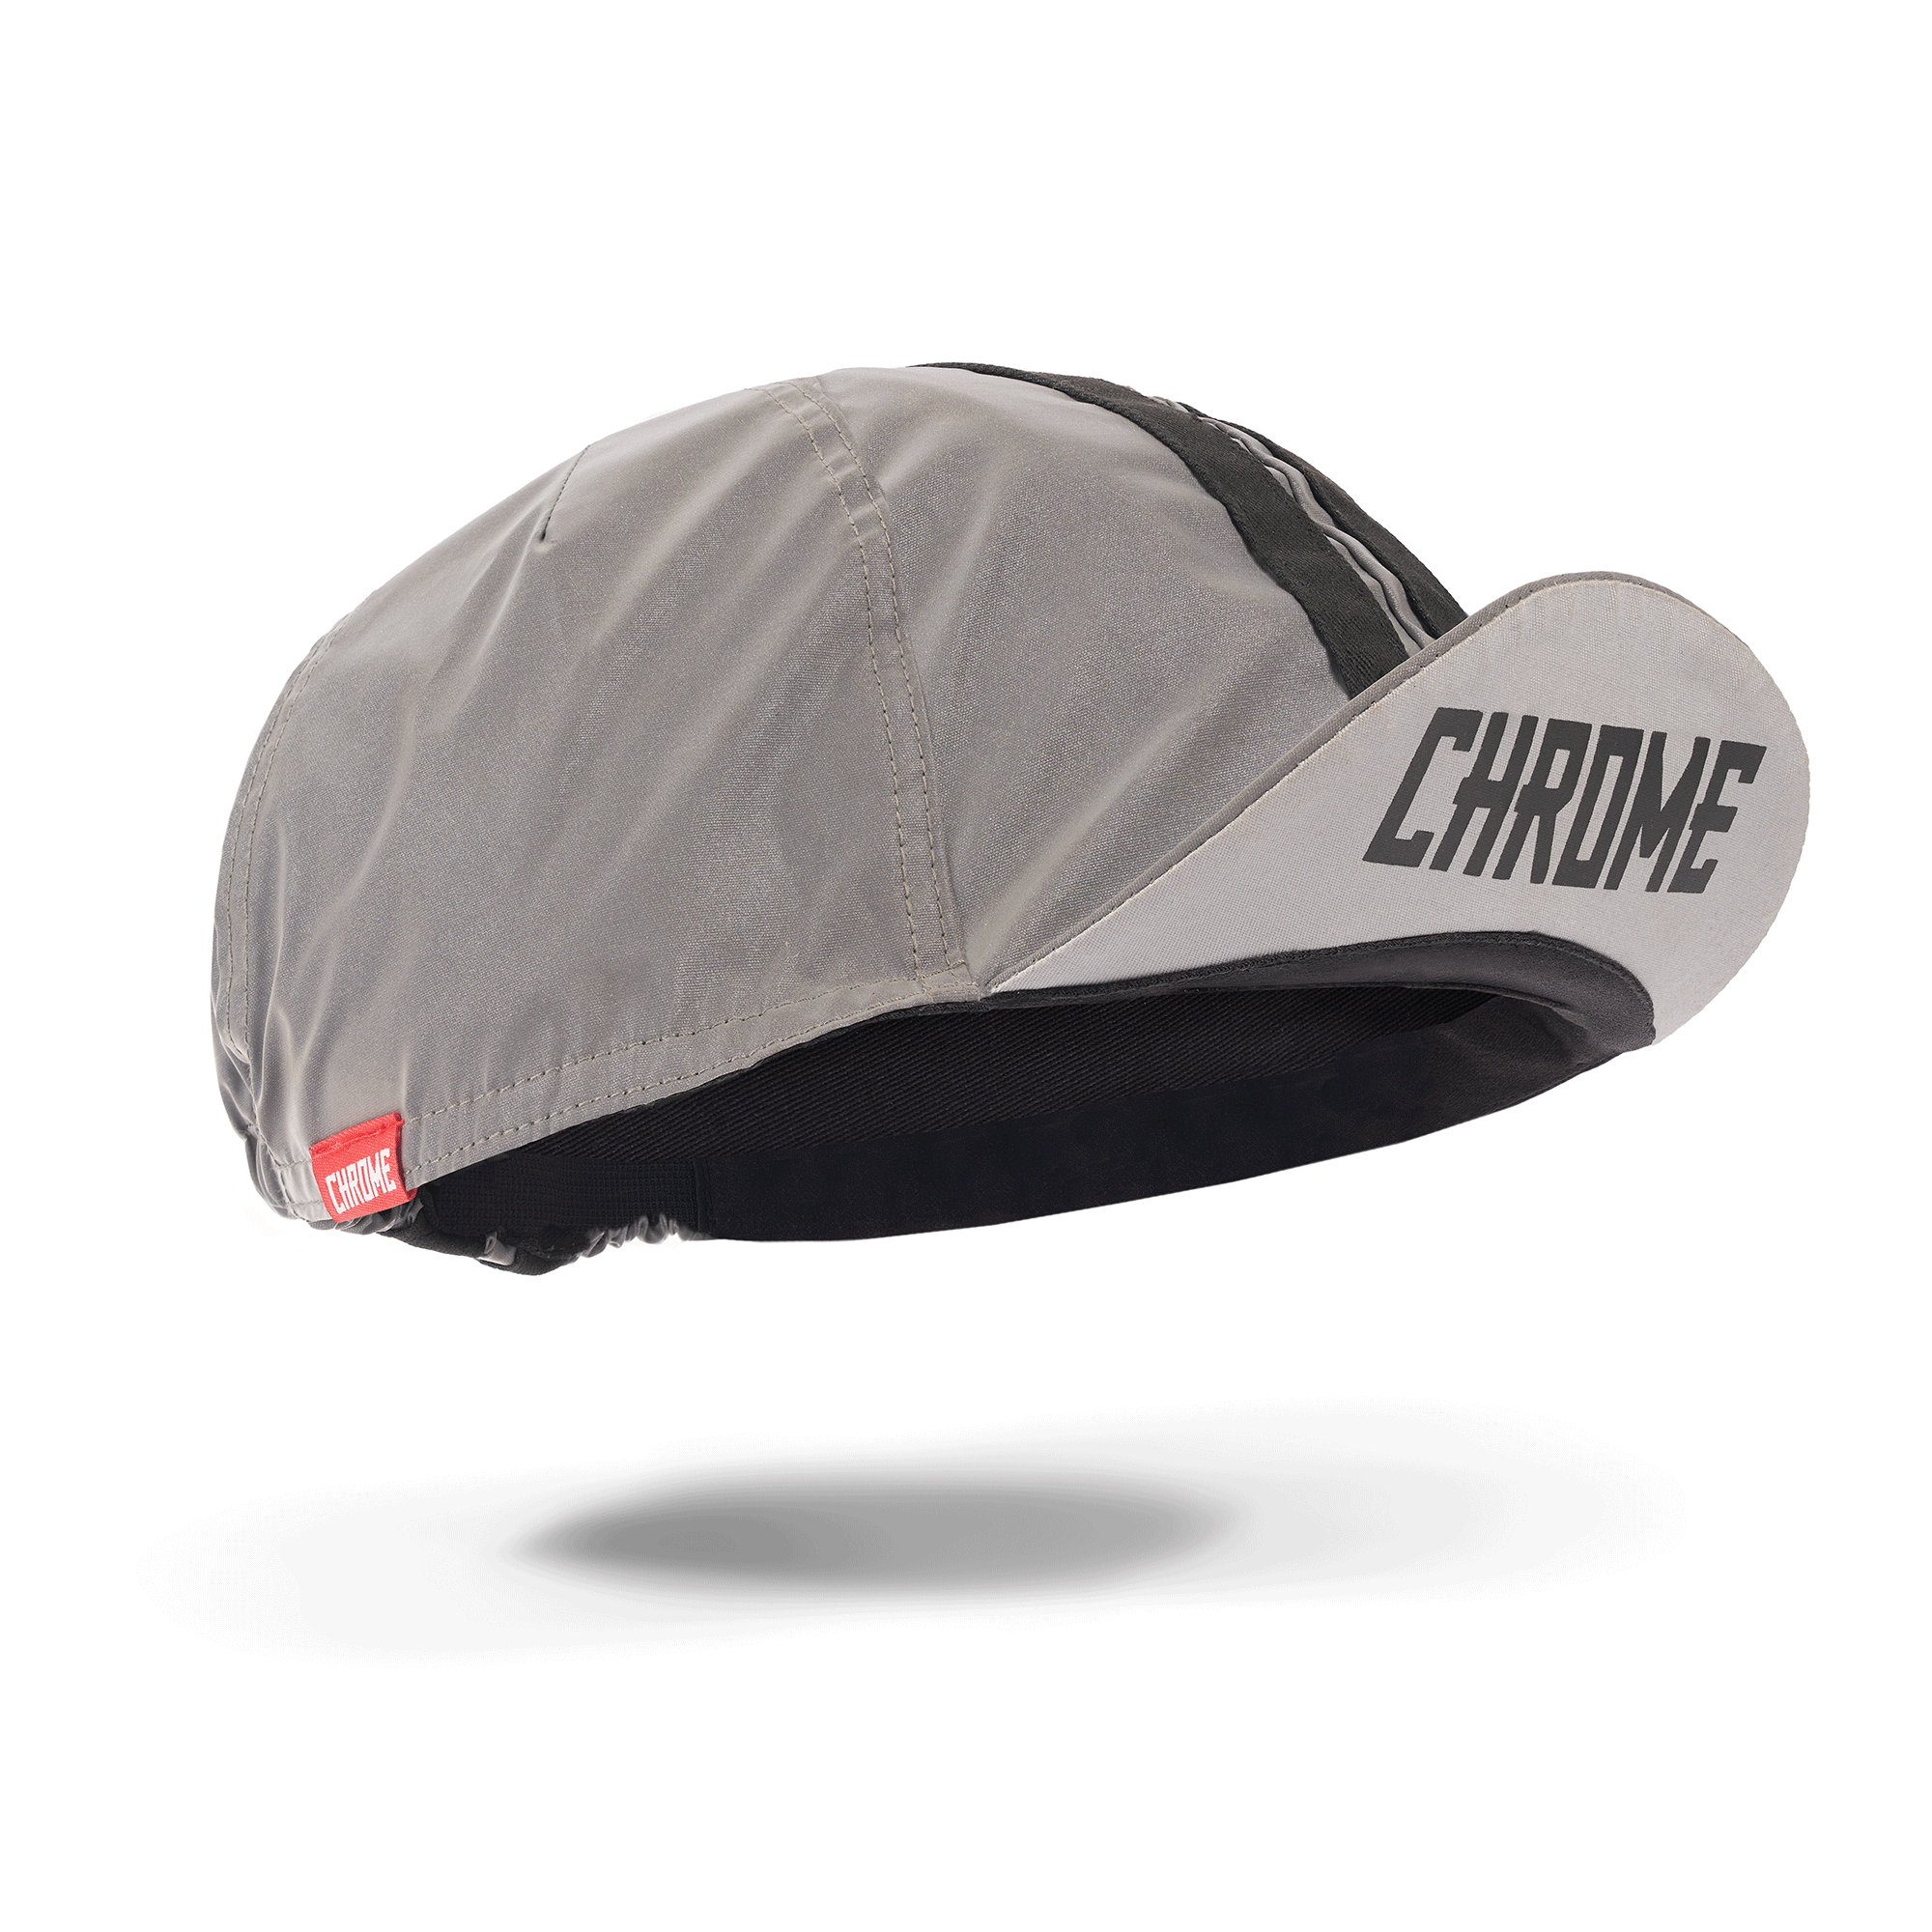 Chrome logo Cycling Cap in reflective showing high reflectivity #color_reflective